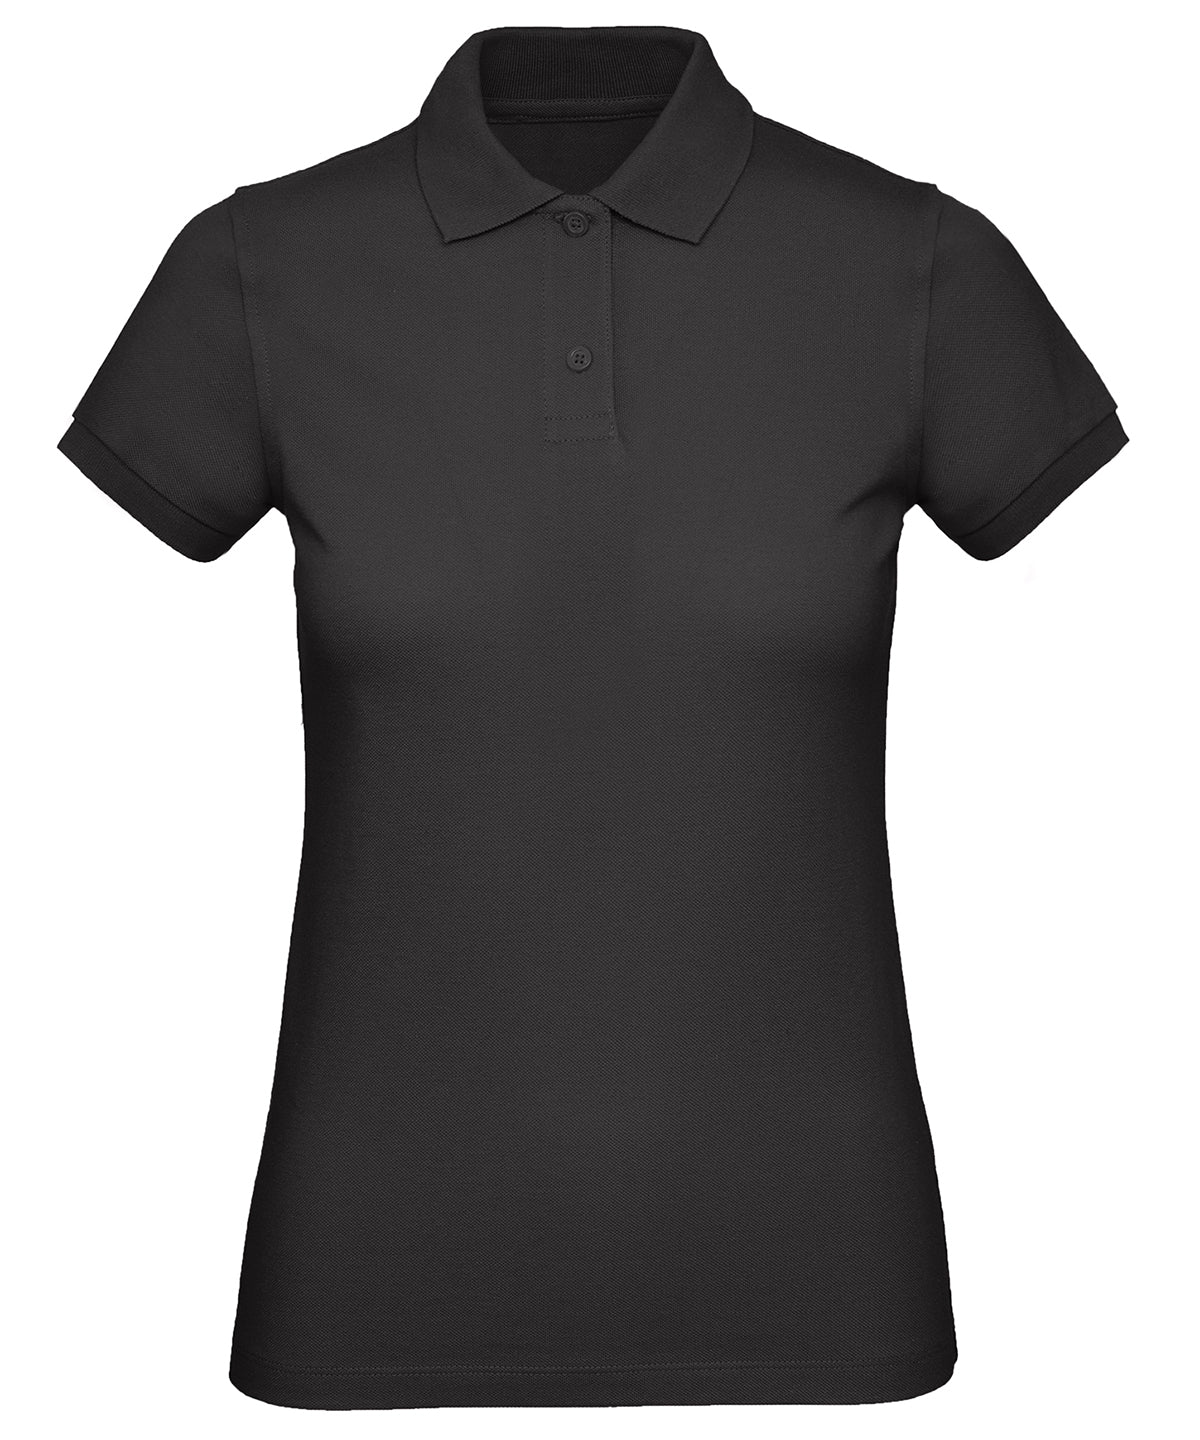 Personalised Polo Shirts - Mid Blue B&C Collection B&C Inspire Polo /women